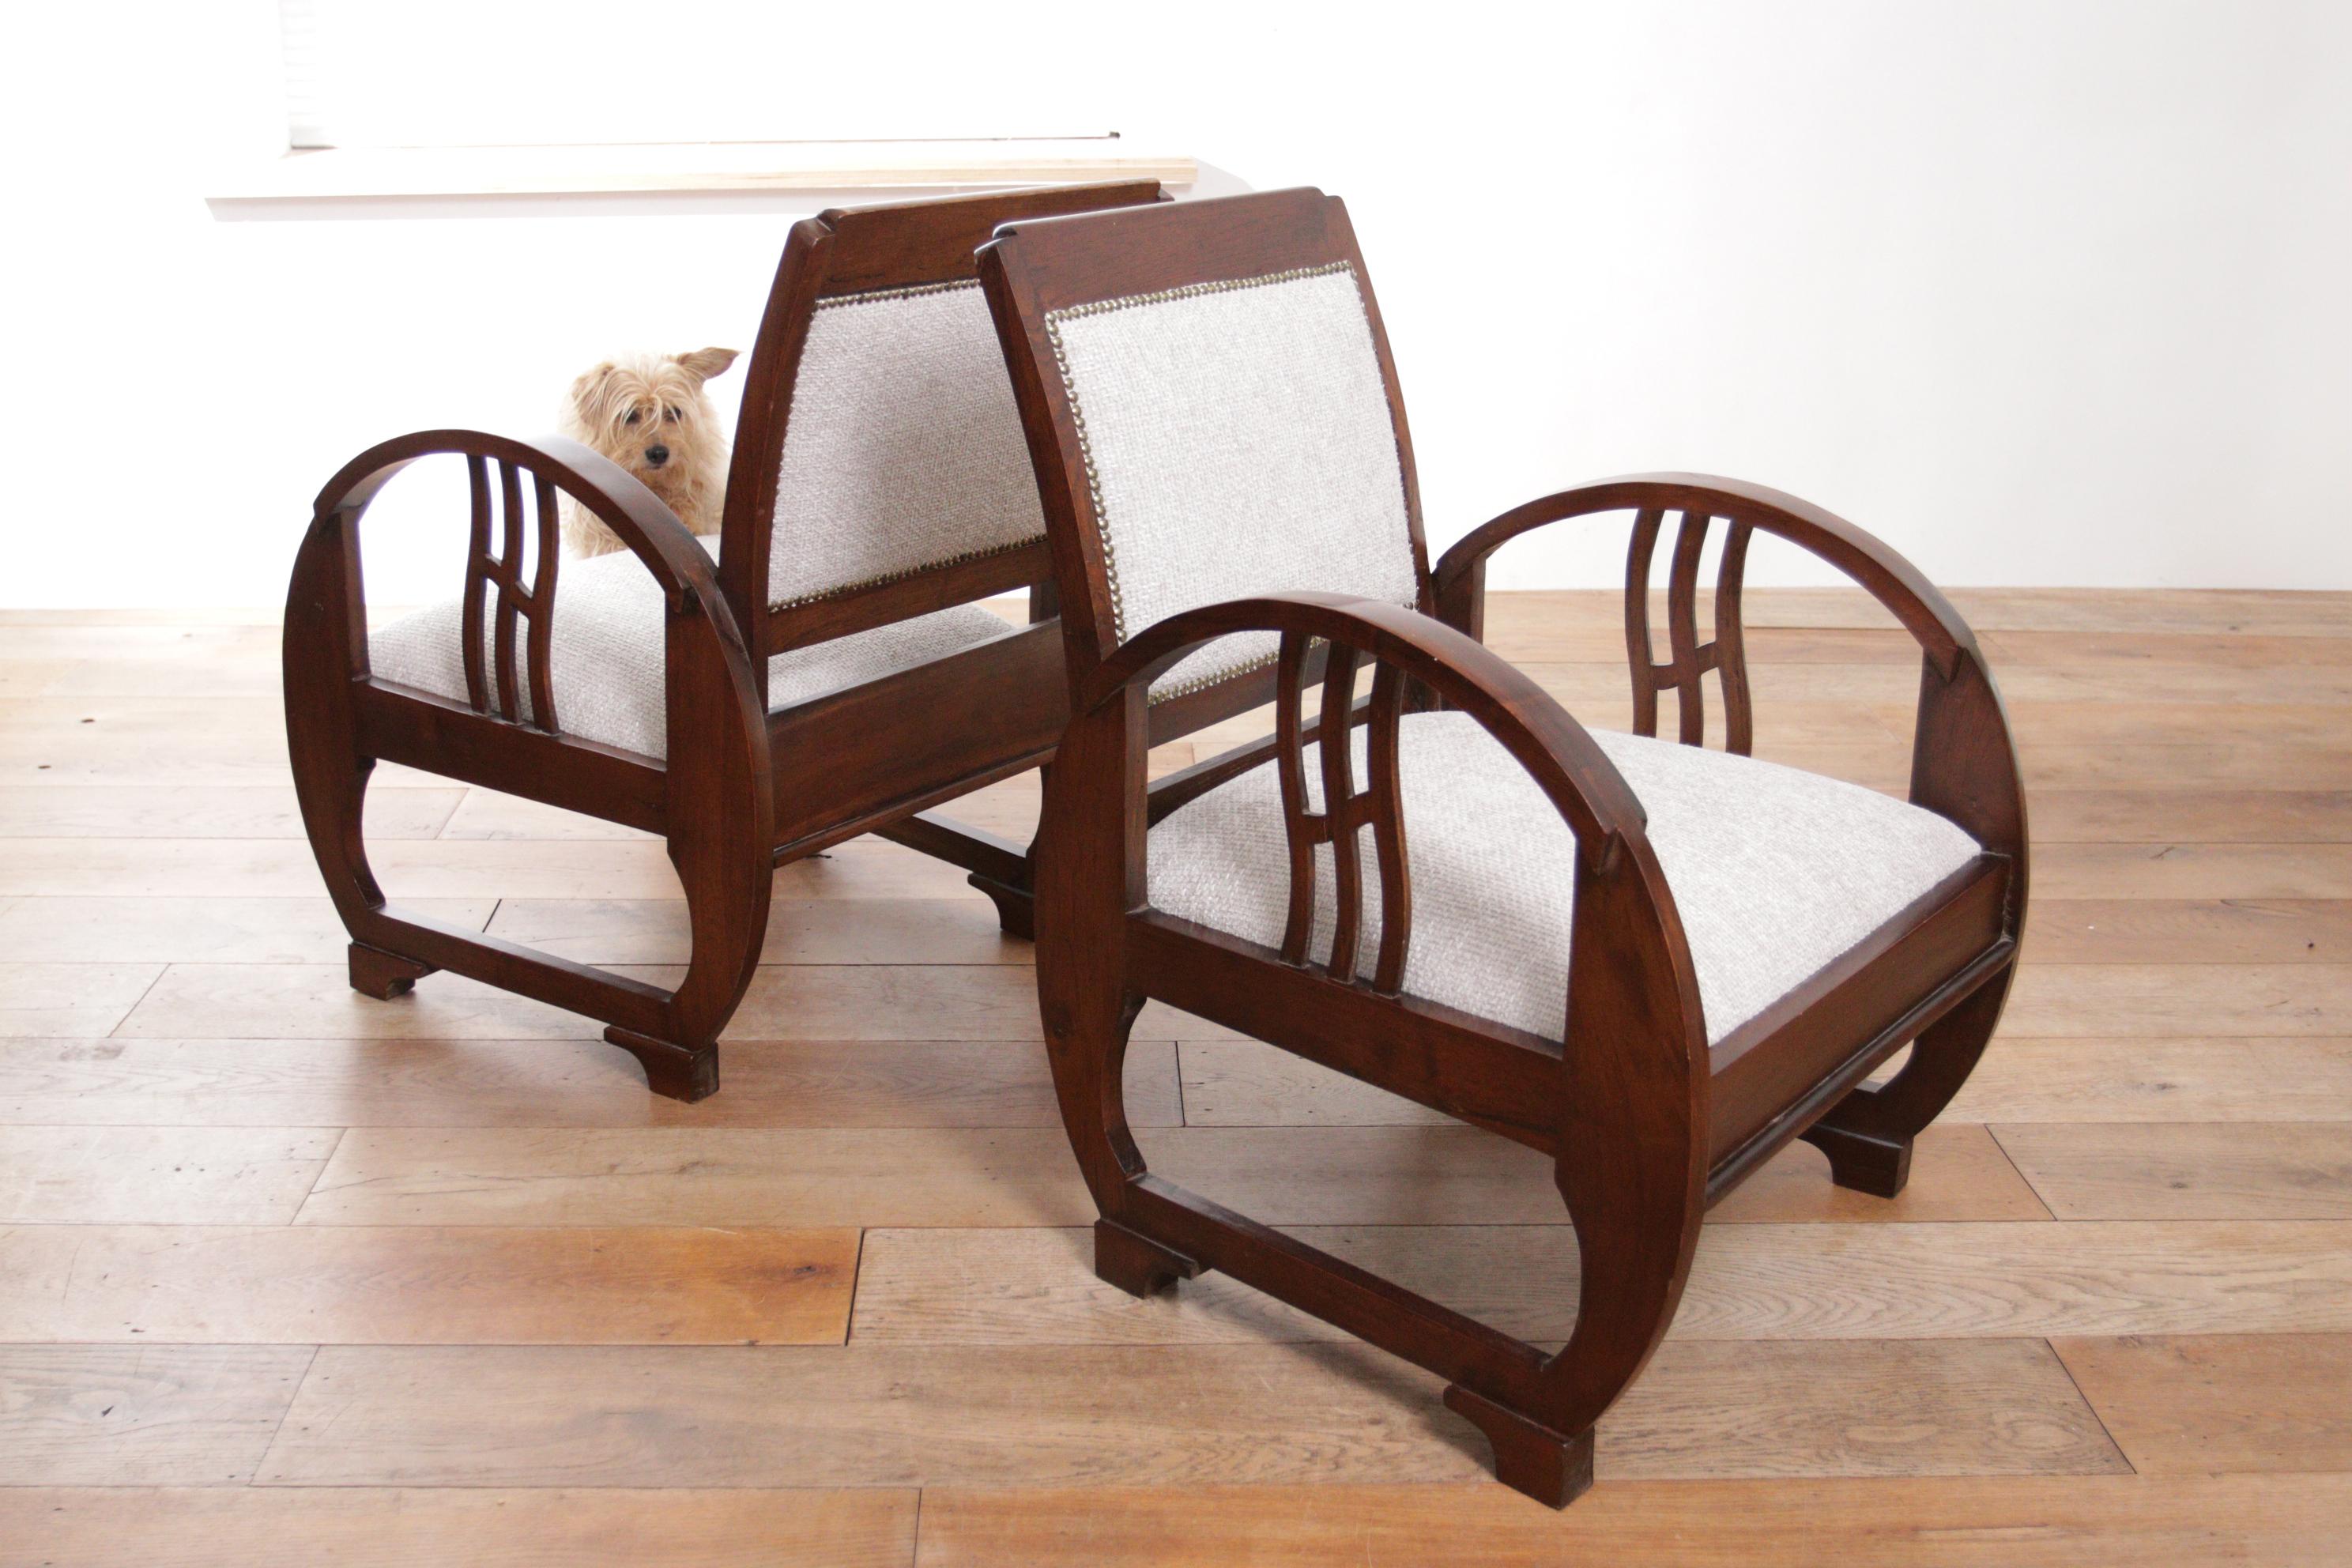 Two Rare Exclusive Elegant Art Deco Vintage French Wooden Armchairs 1930's For Sale 2